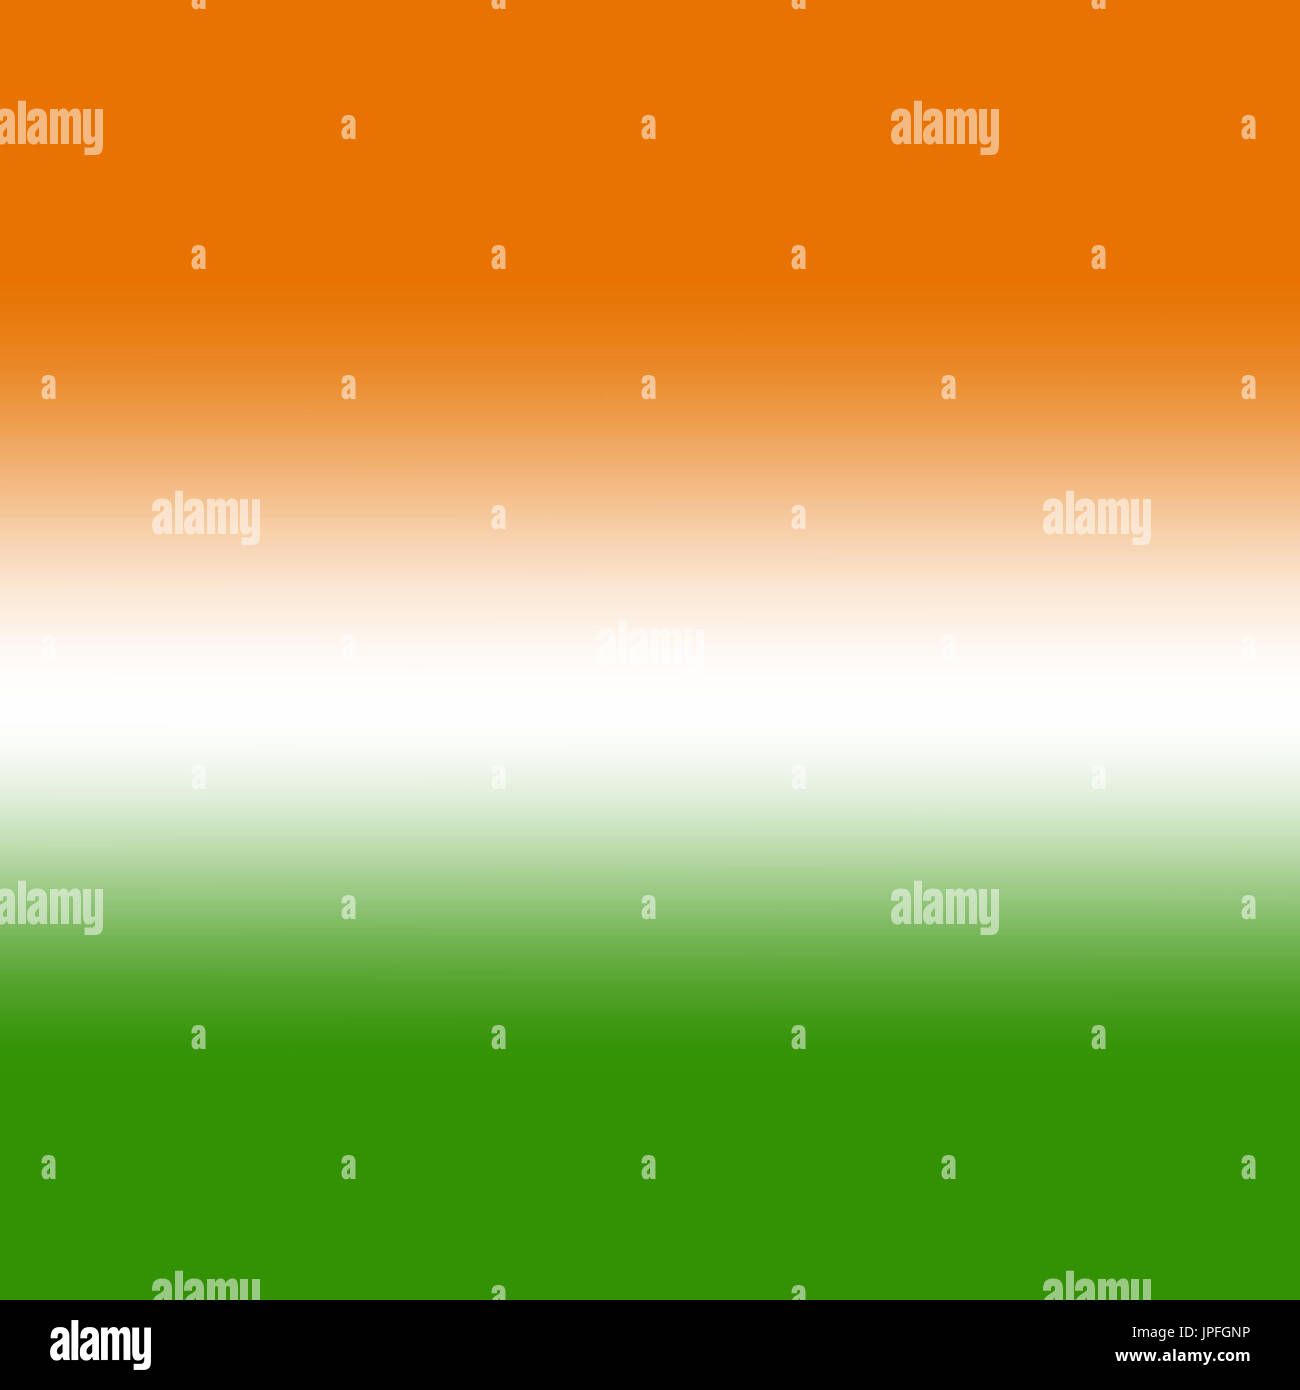 Indian Flag Tricolor Background Wallpaper Stock Photo - Alamy